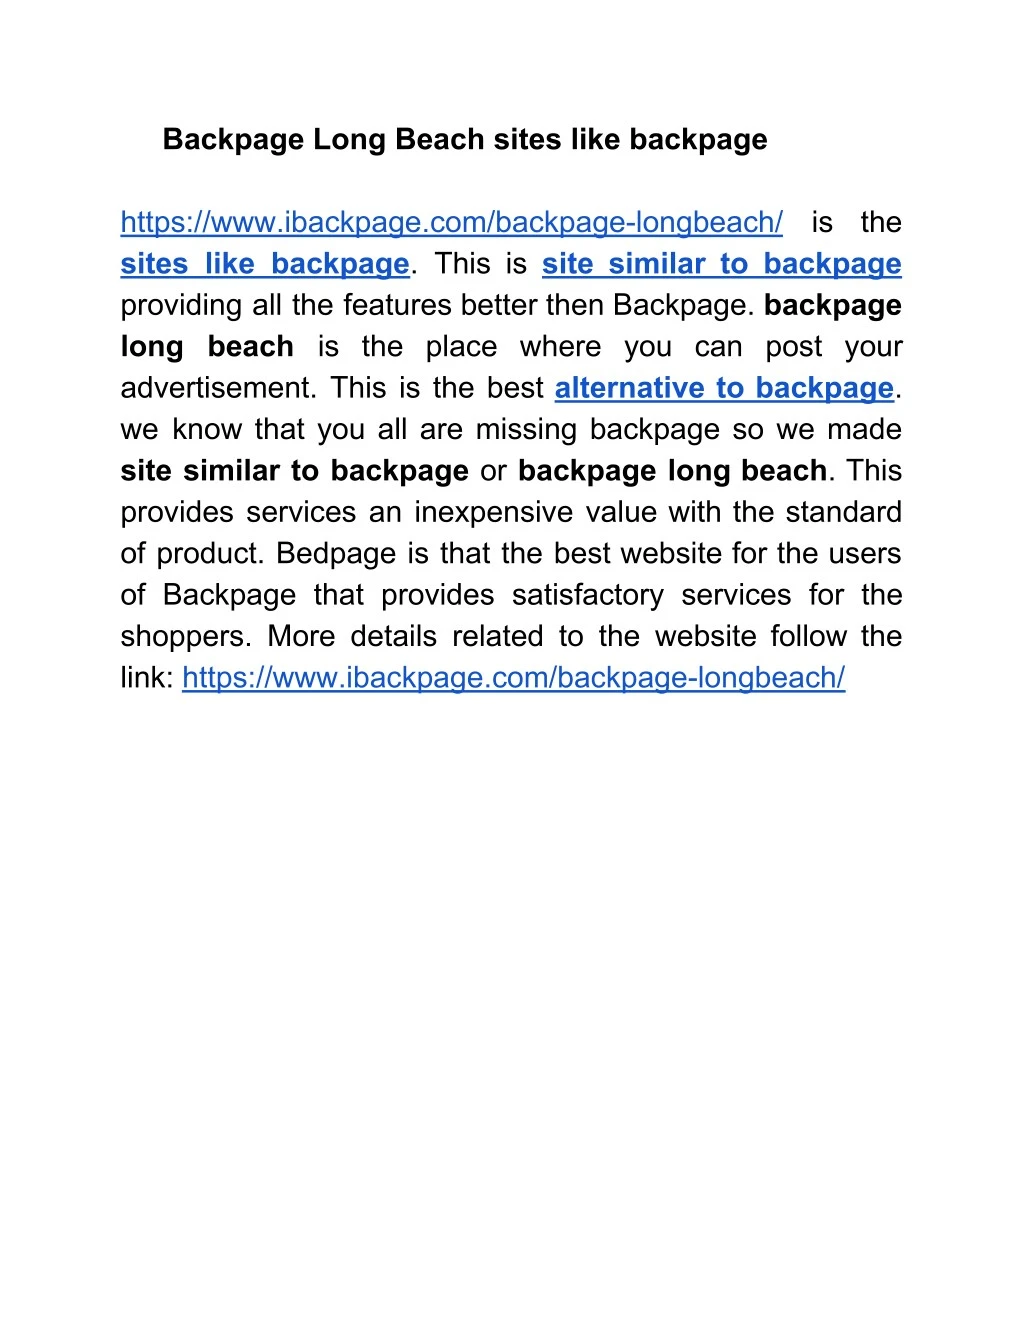 backpage long beach sites like backpage https